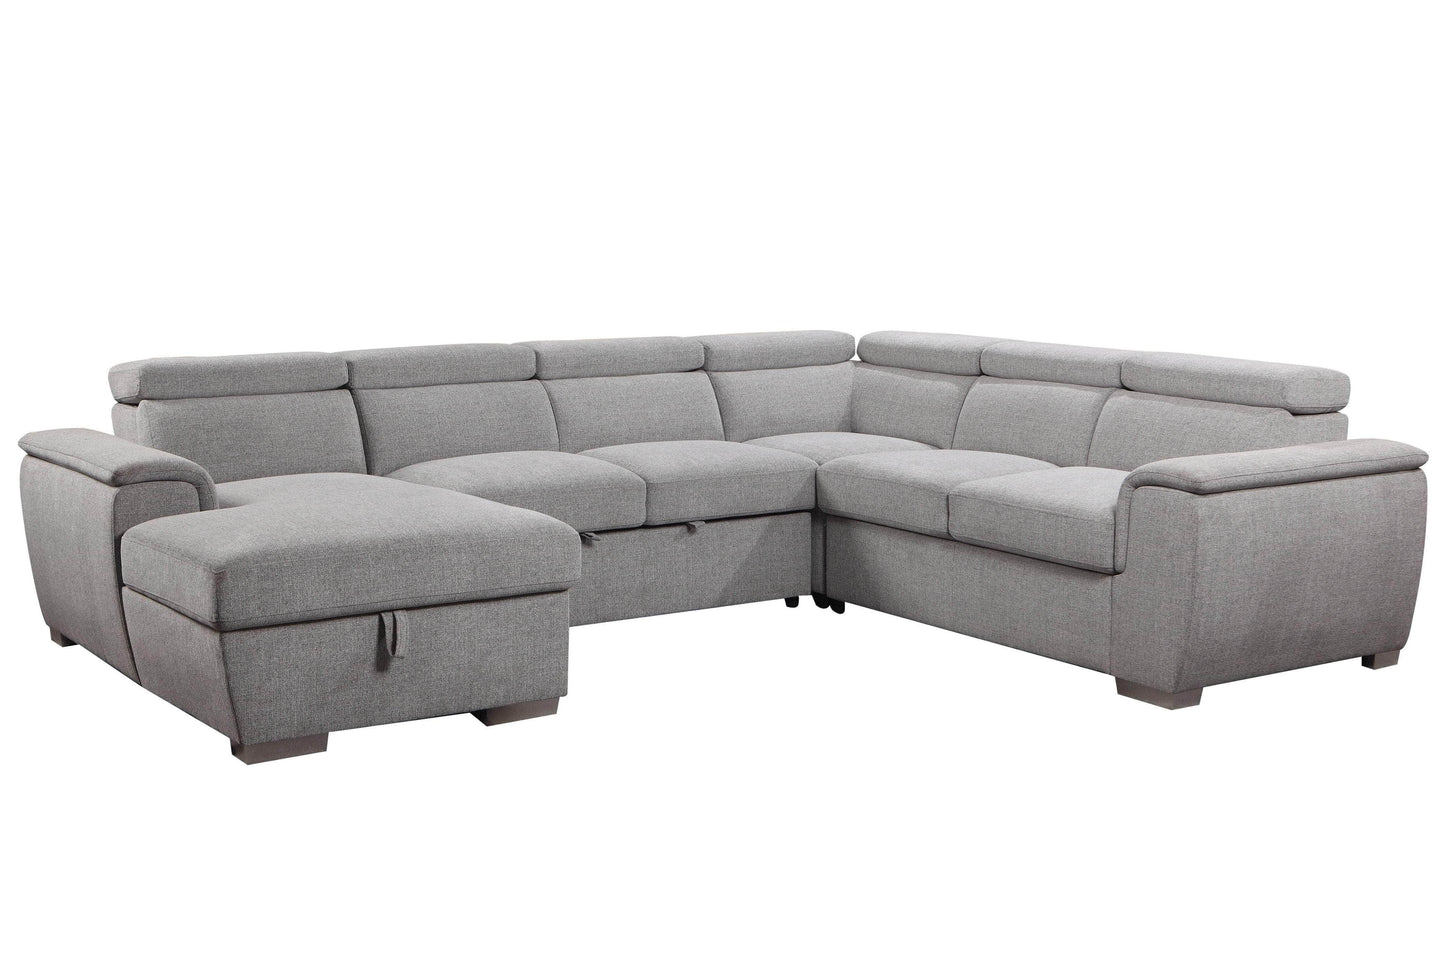 Urban Cali Sectional Left Facing Chaise Bel Air Large Modular Sleeper Sectional Sofa Bed with Storage Chaise in Thora Stone